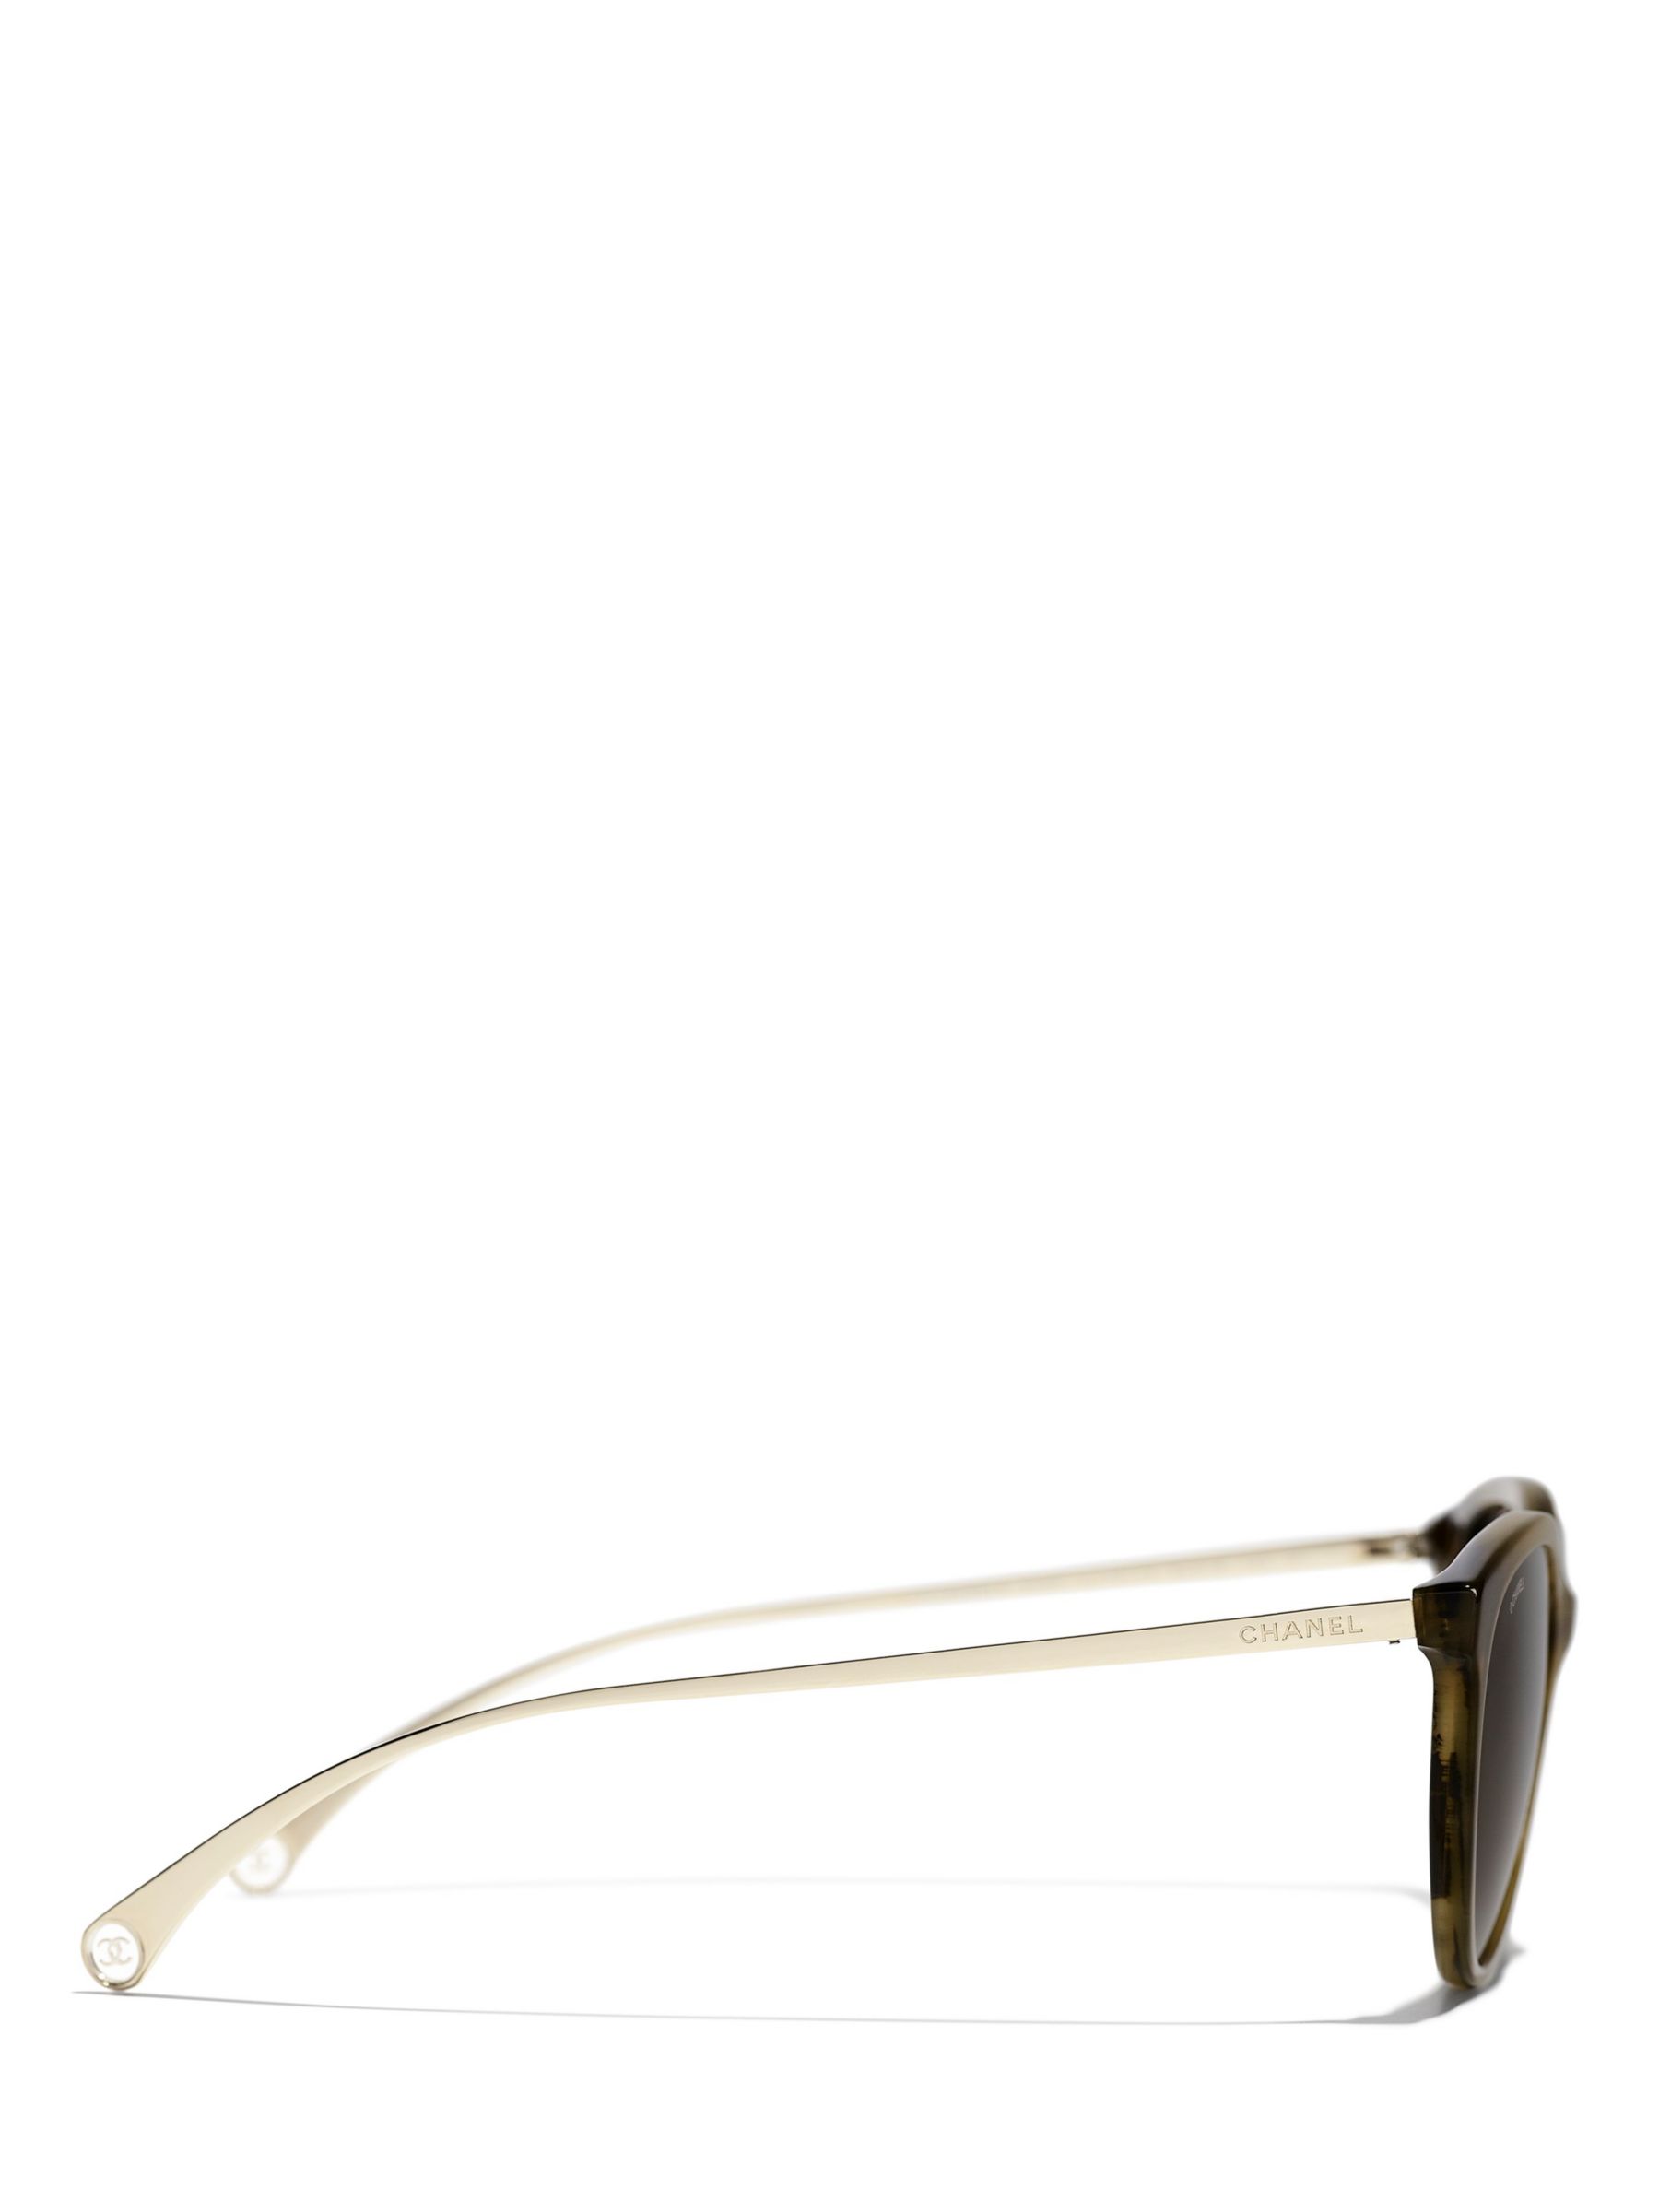 CHANEL CH5459 Oval Sunglasses, Green/Brown at John Lewis & Partners